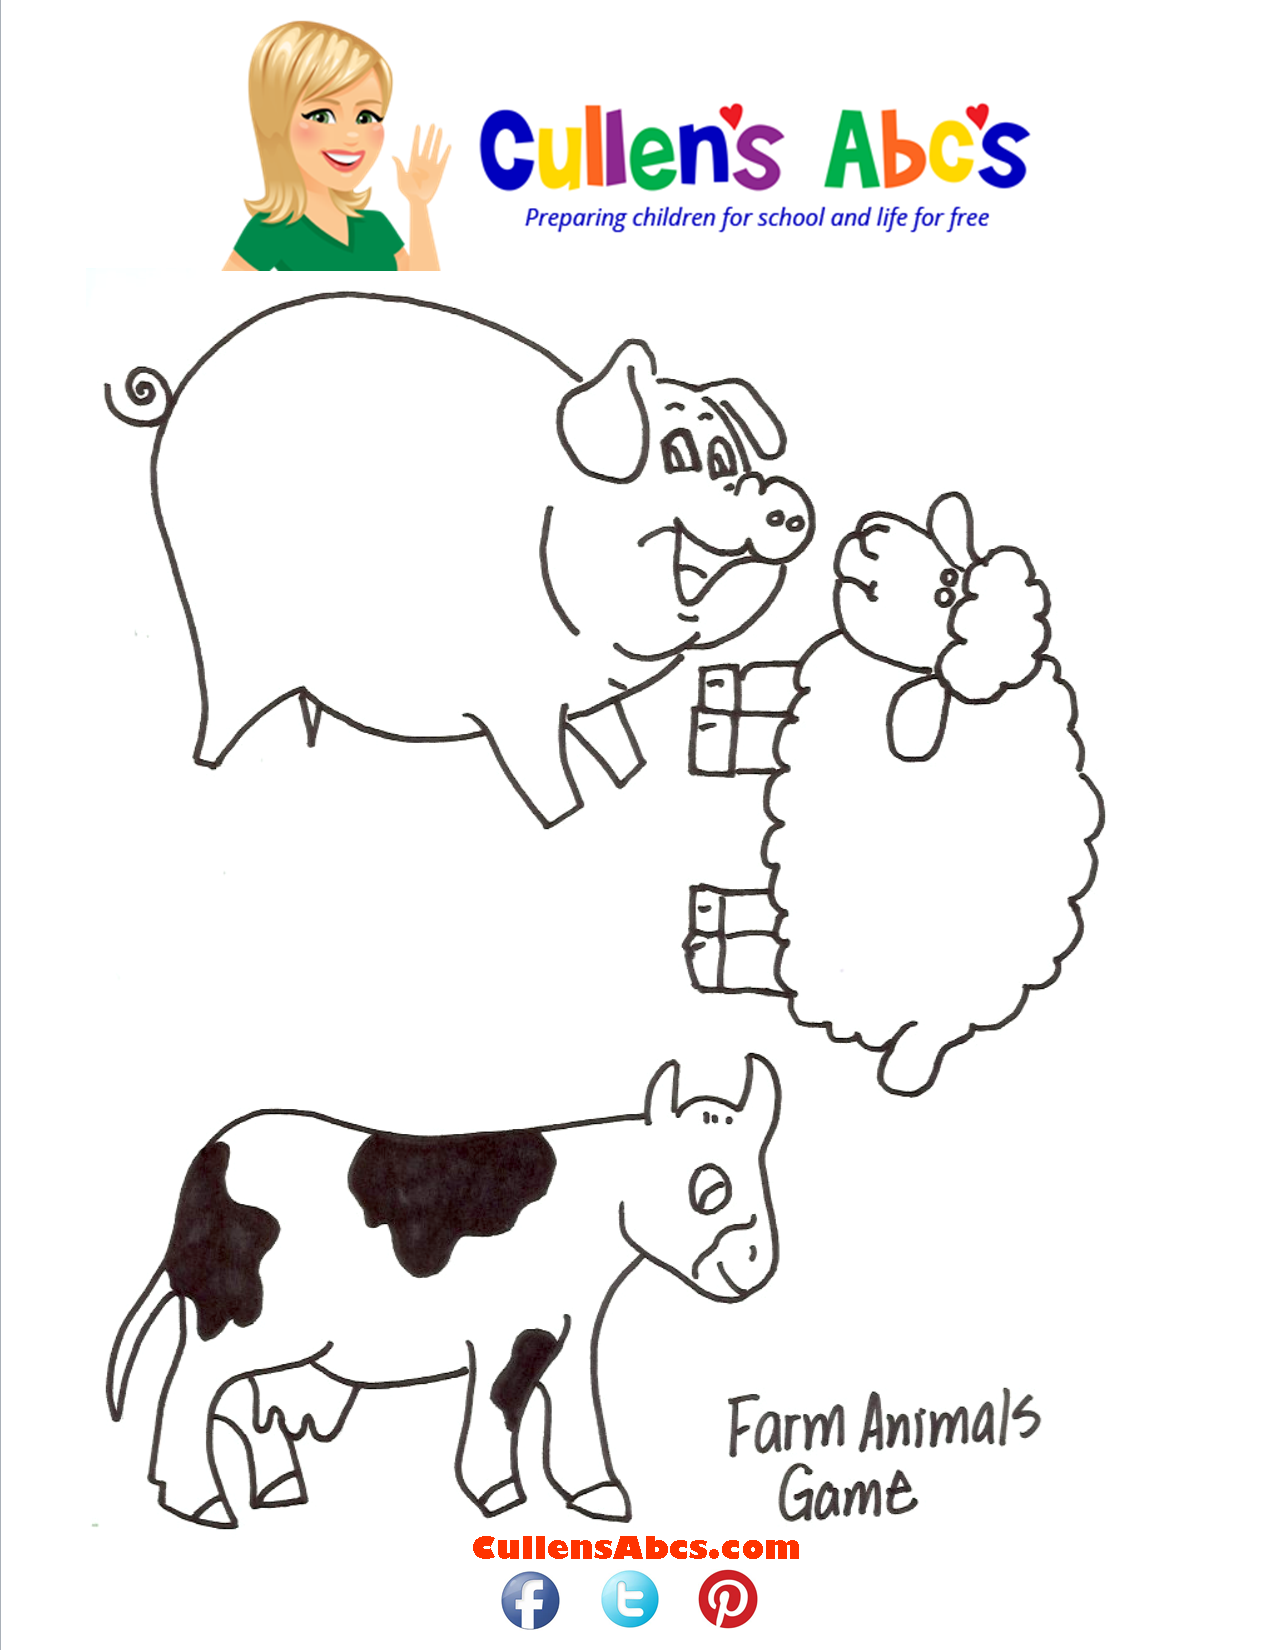 Farm aminals games. online exercise for